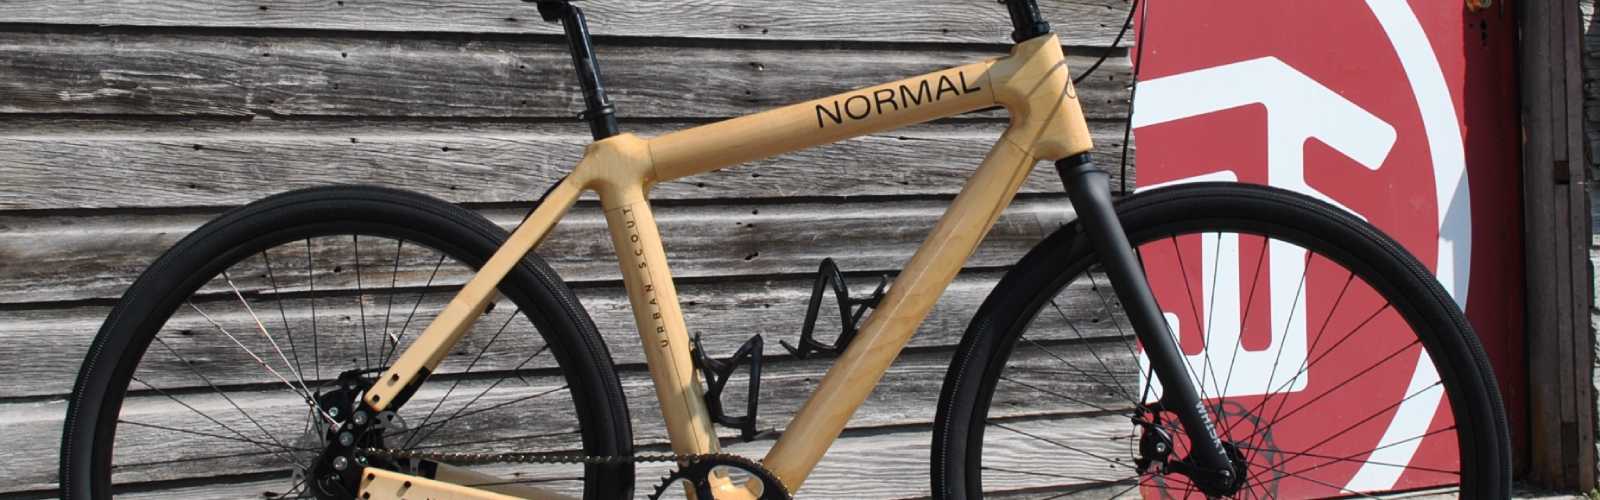 Normal Bicycles are constructed from multiple layers of glued wood veneer, creating a wood composite as strong as fiber or steel.